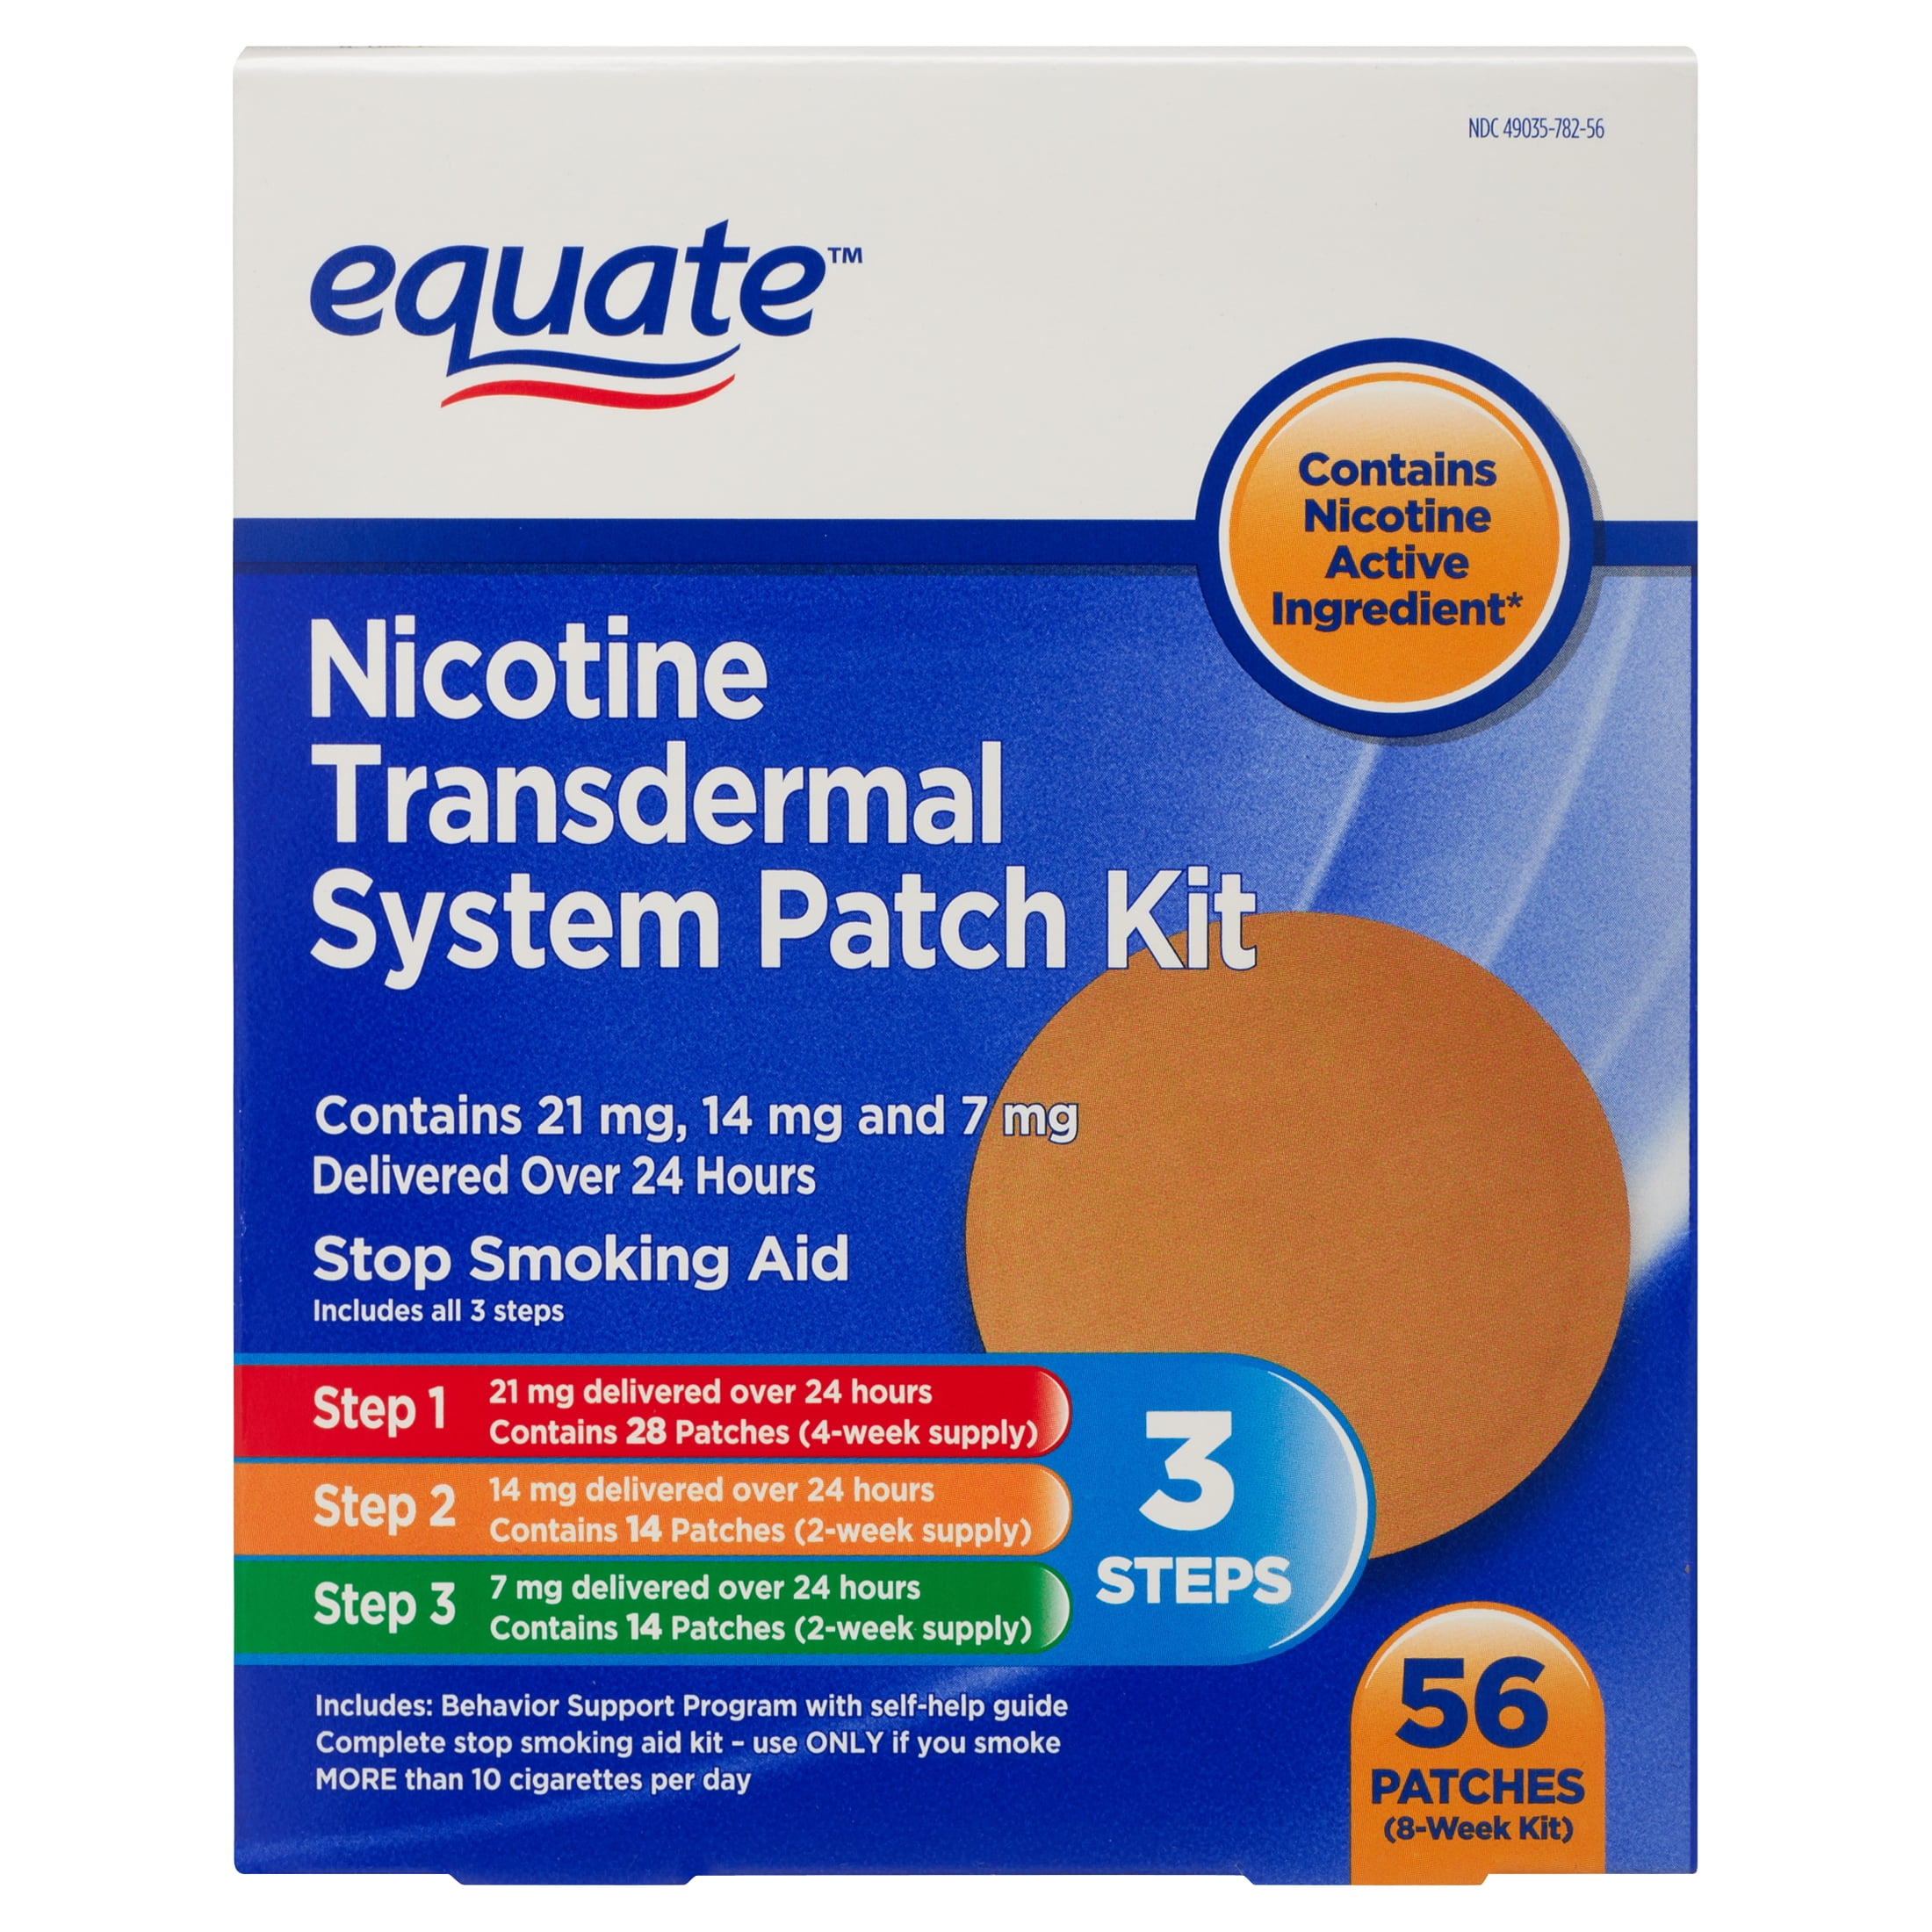 Can I Get Nicotine Patches Over the Counter?